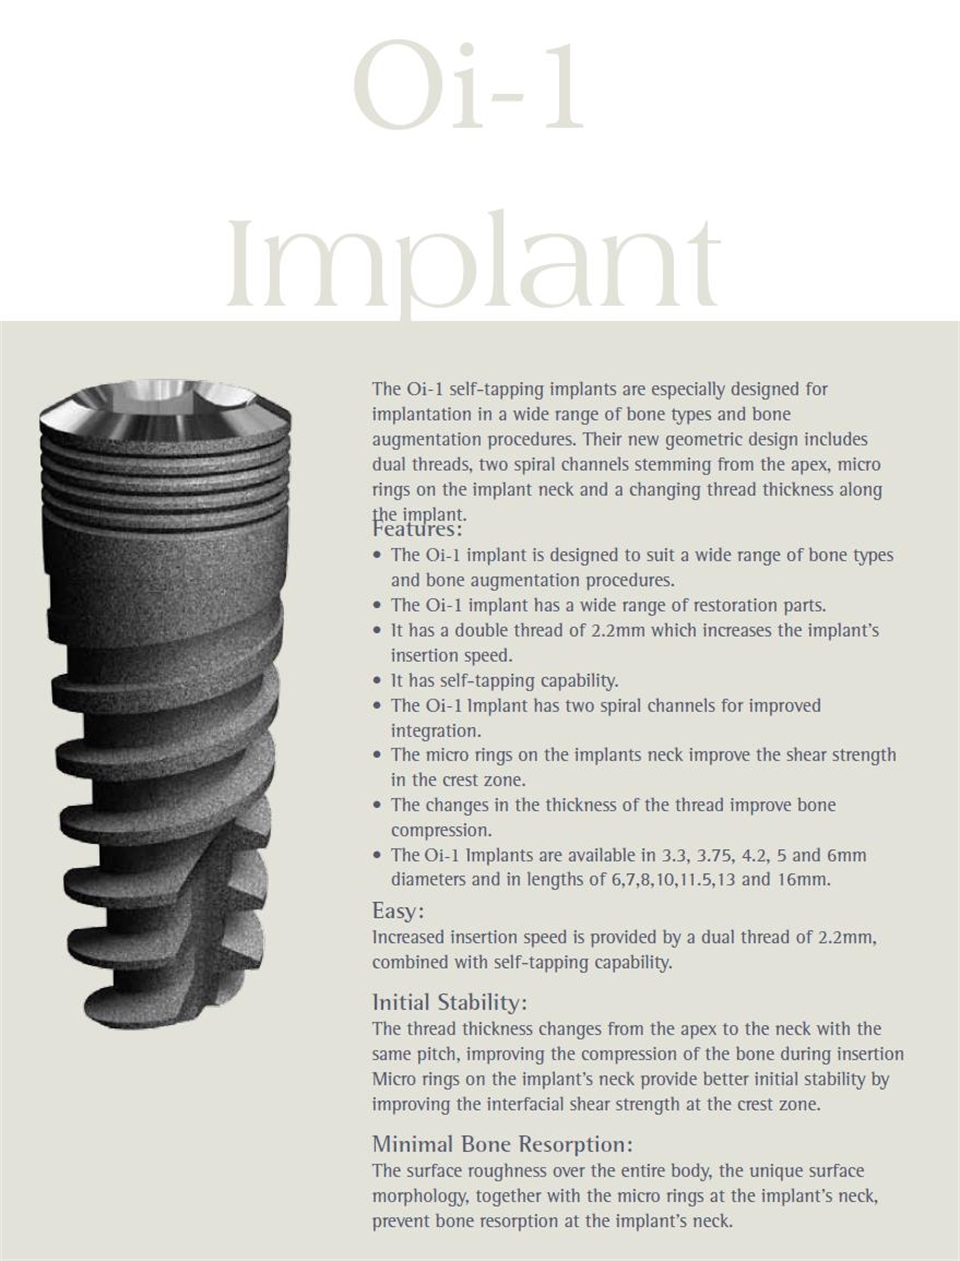 The Oi-1 self-tapping implants are especially designed for implantation in a wide range of bone types and bone augmentation procedures.